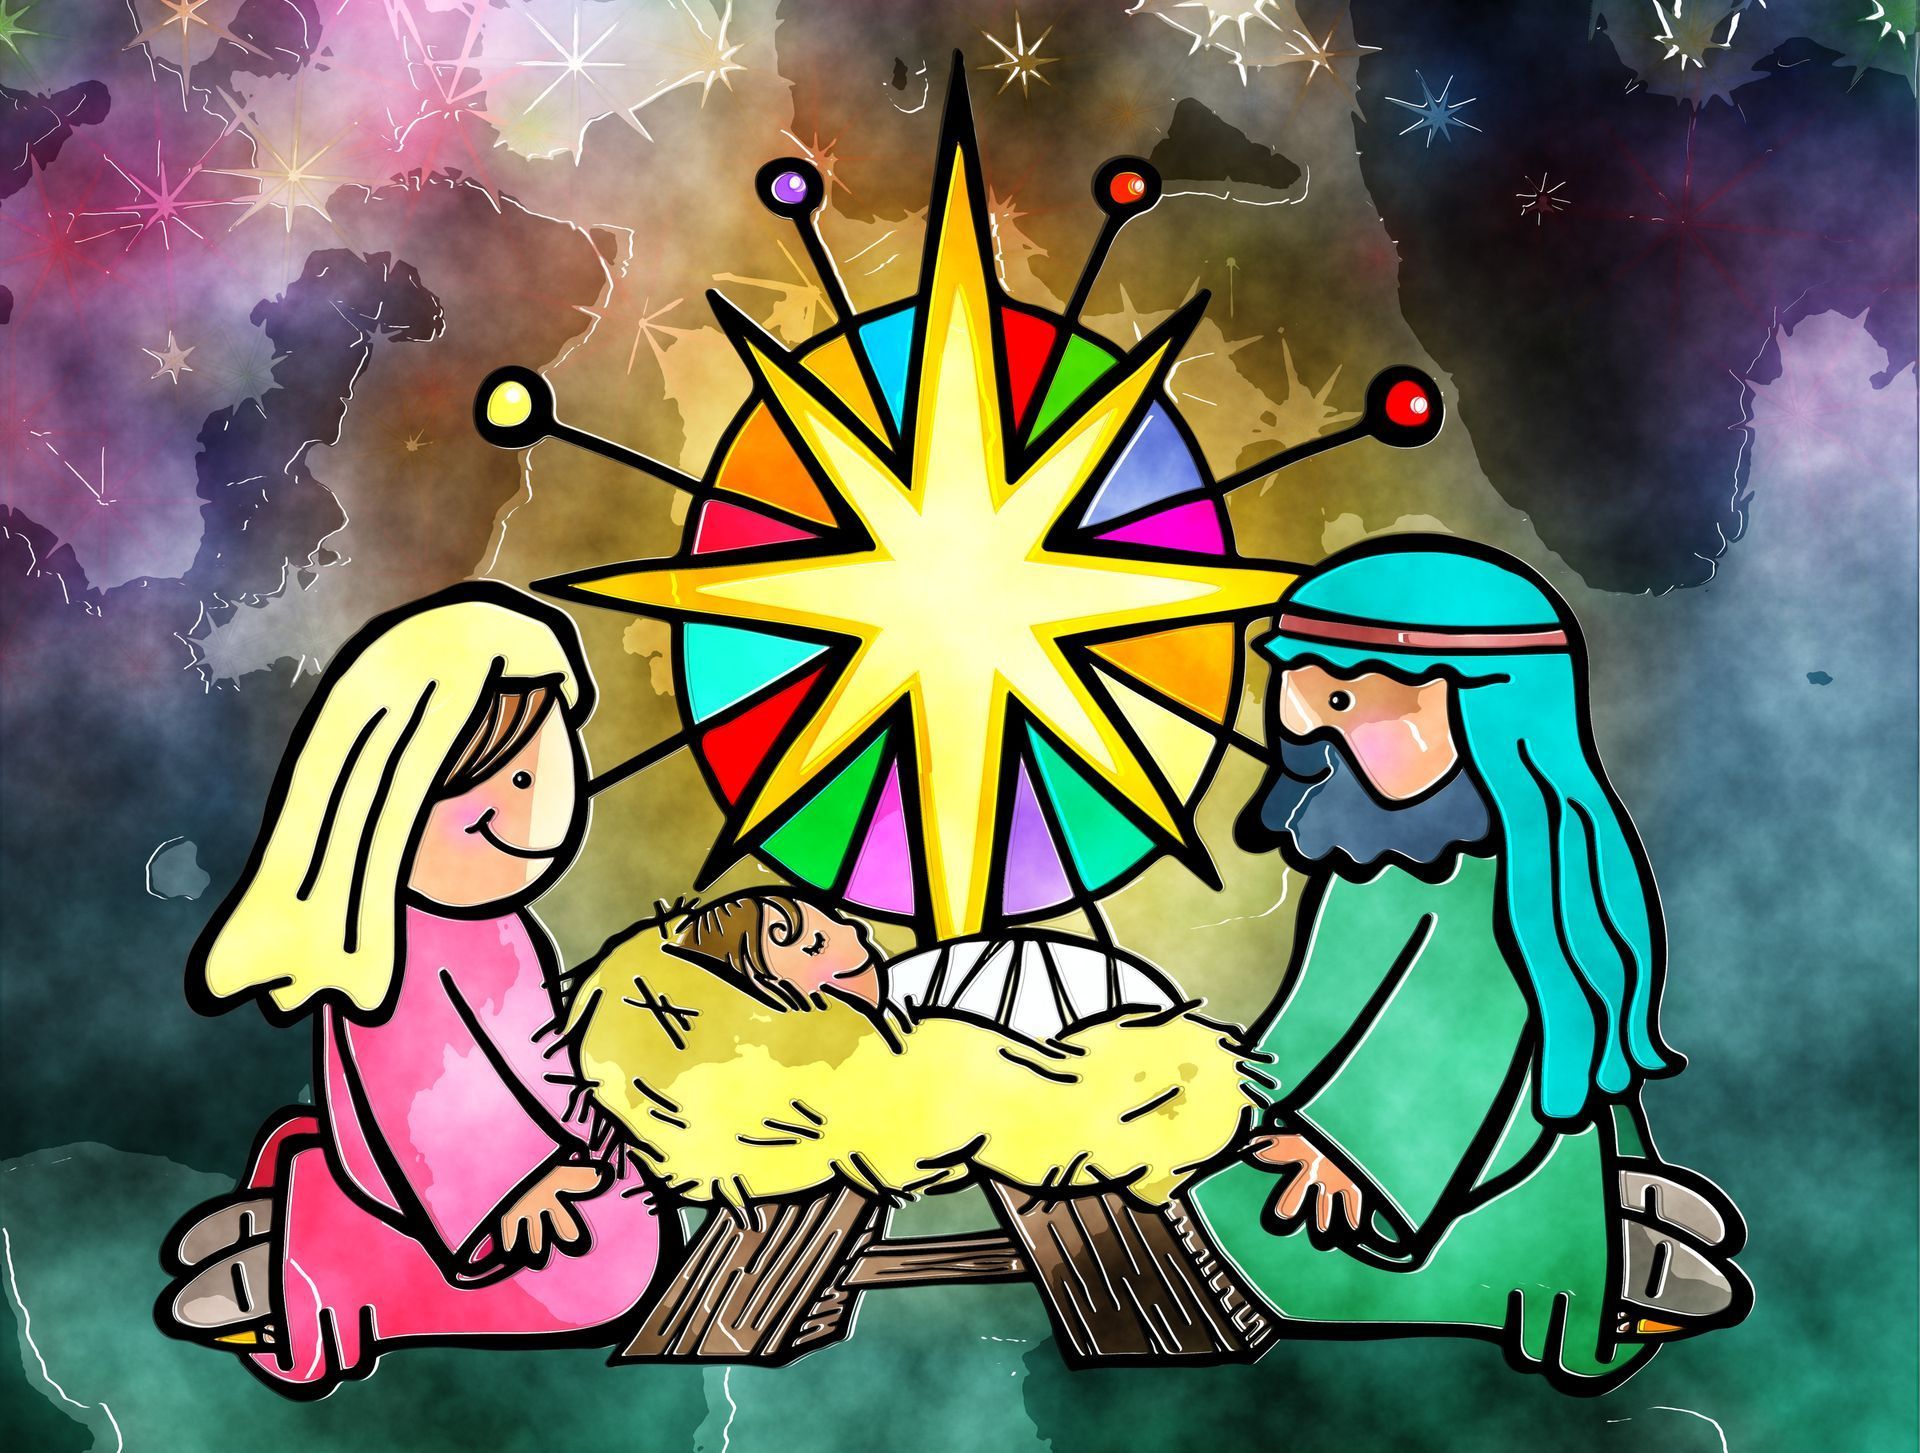 A colourful but simple nativity scene. Just Mary, Joseph and then Jesus in a manger. The scene is backed with a large colourful star.